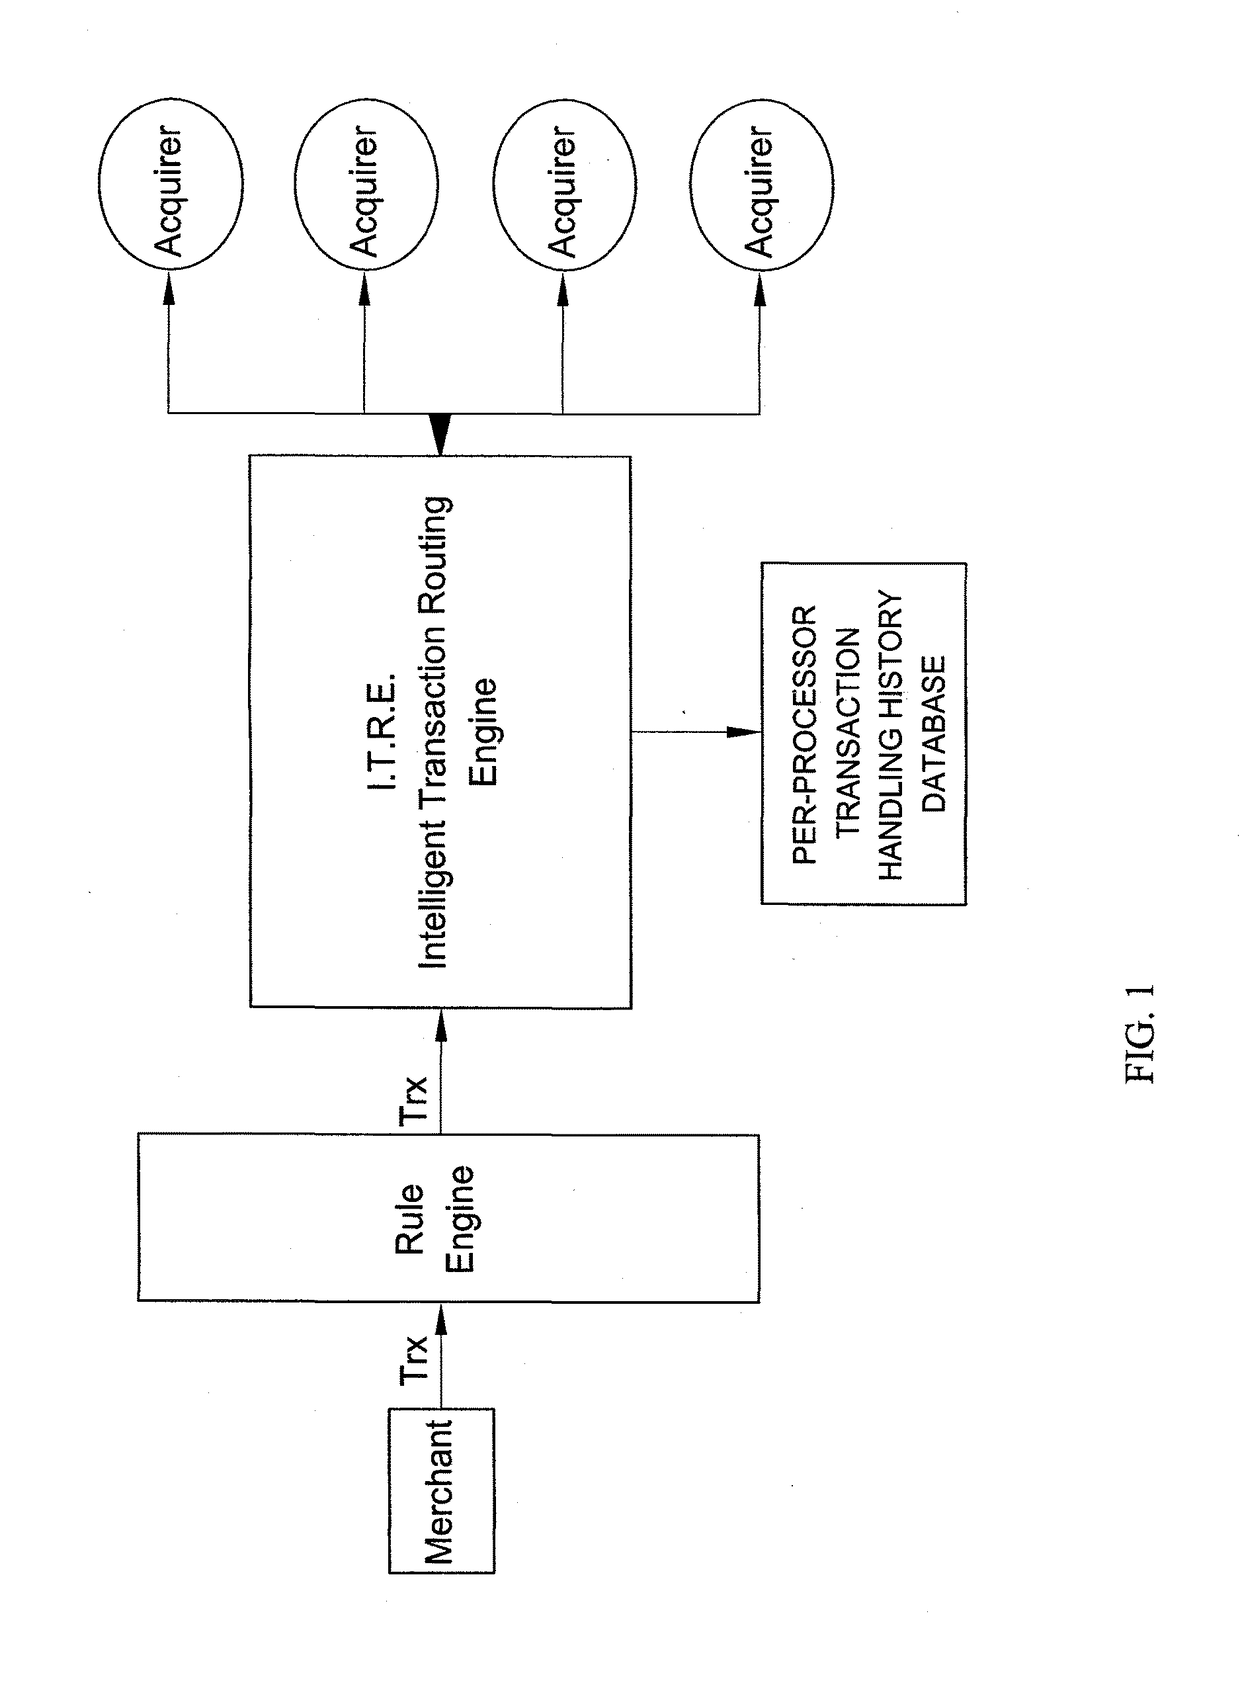 Computerized transaction routing system and methods useful in conjunction therewith